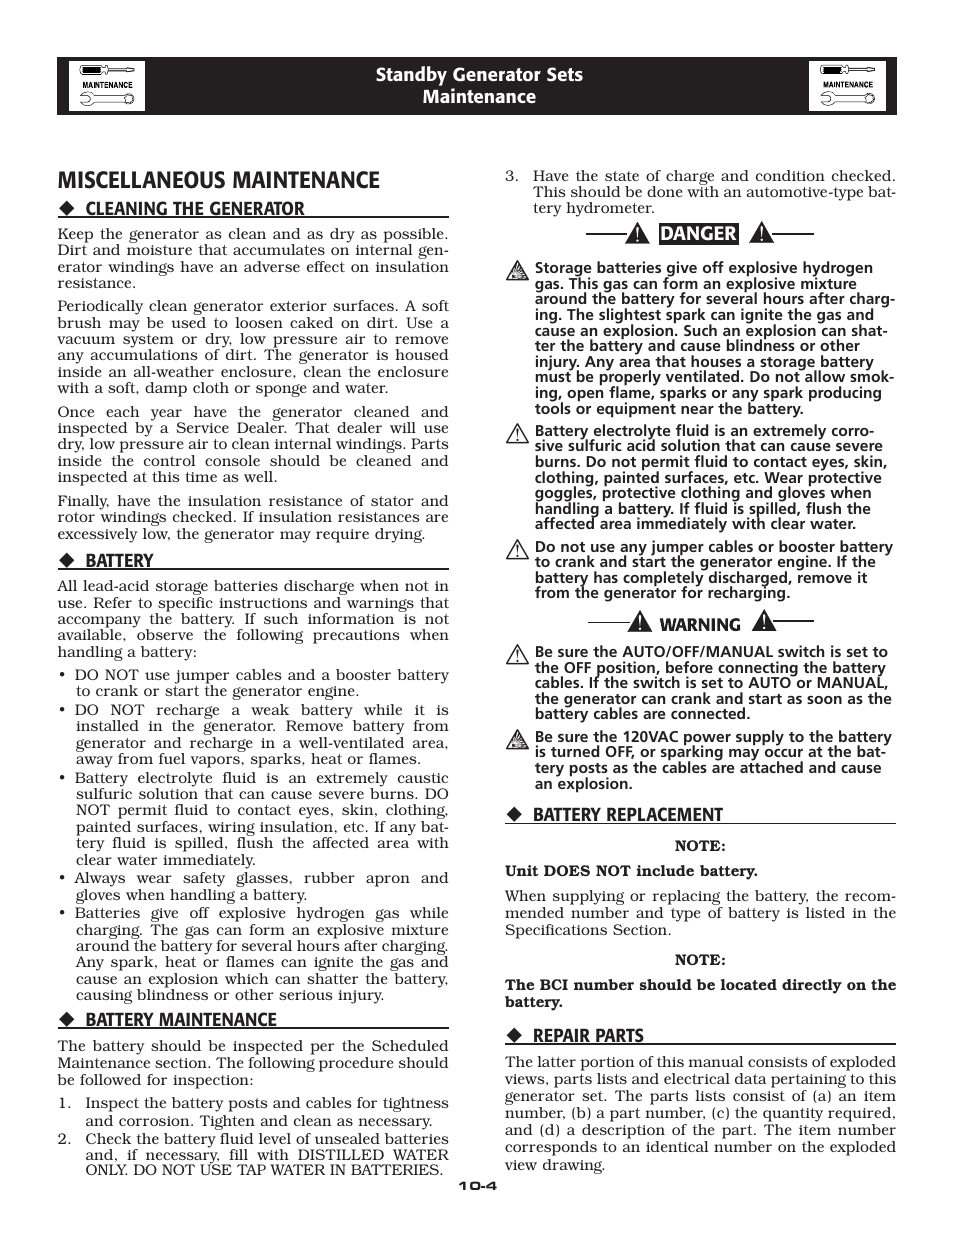 Miscellaneous maintenance | LG 30kW User Manual | Page 19 / 60